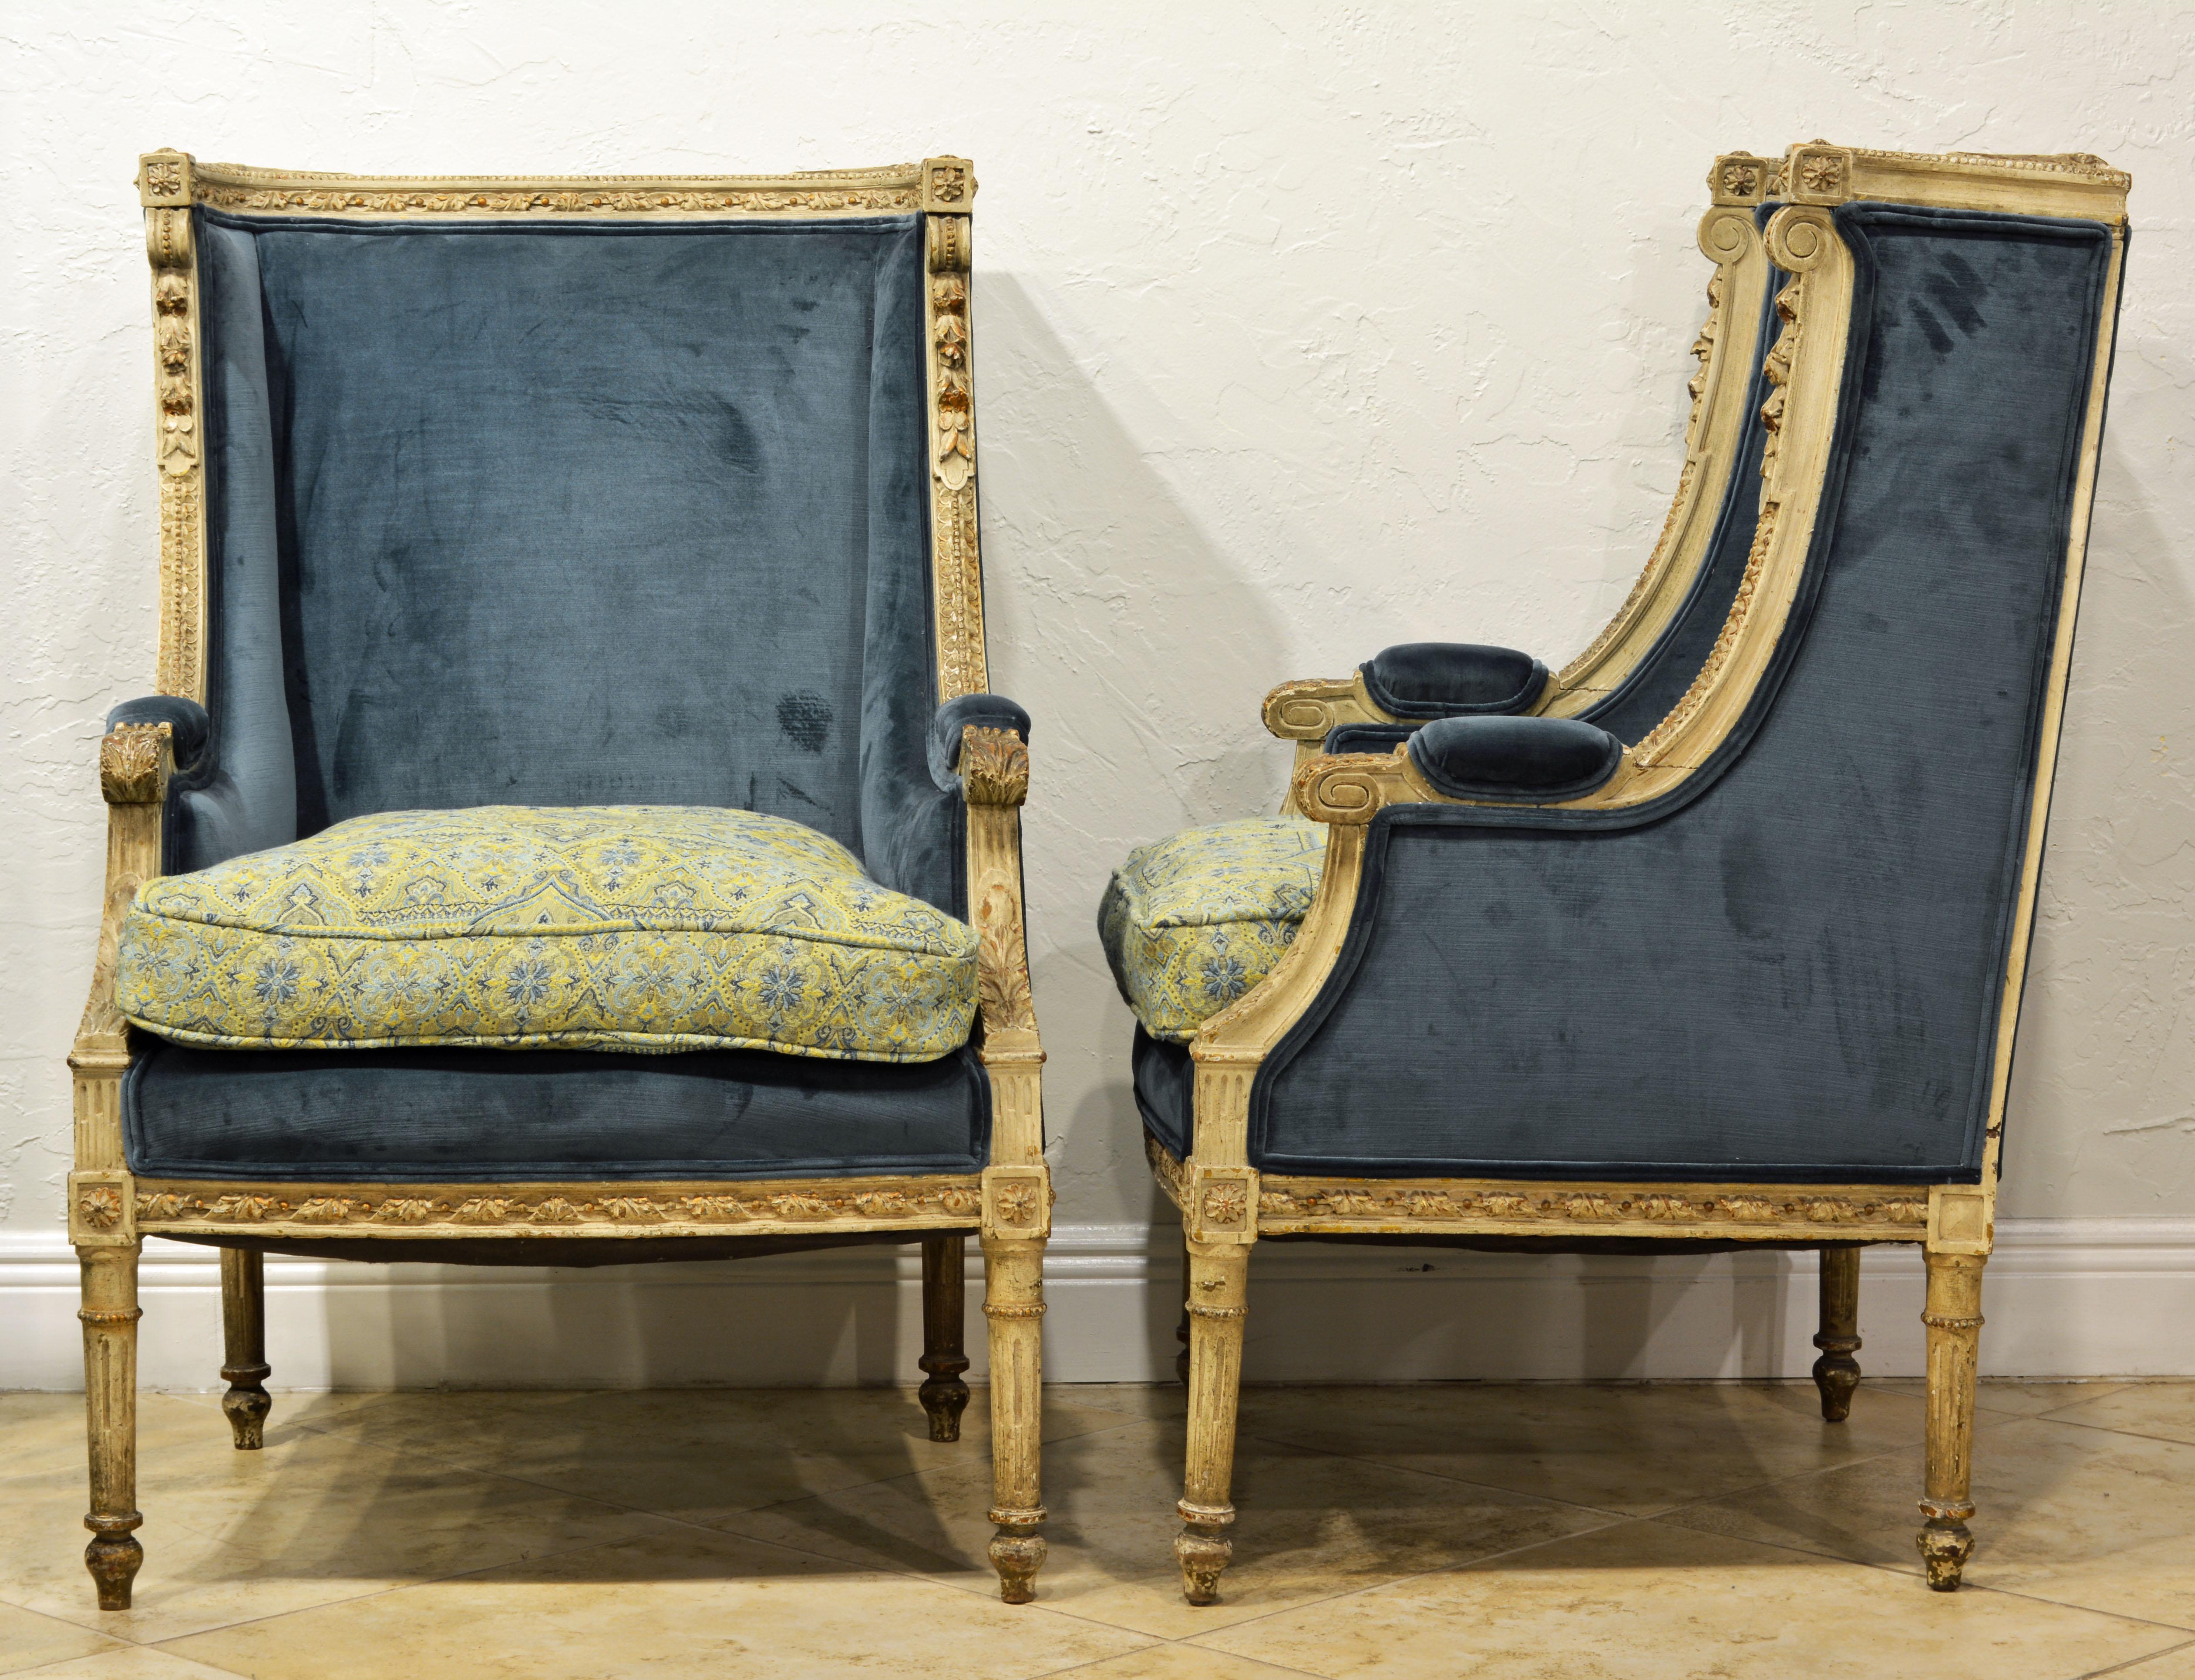 Painted in antique grey/white with small gilt accents and nice wear these well carved bergeres are tastefully complimented by their new cover of blue velvet and matching French pattern cushions.